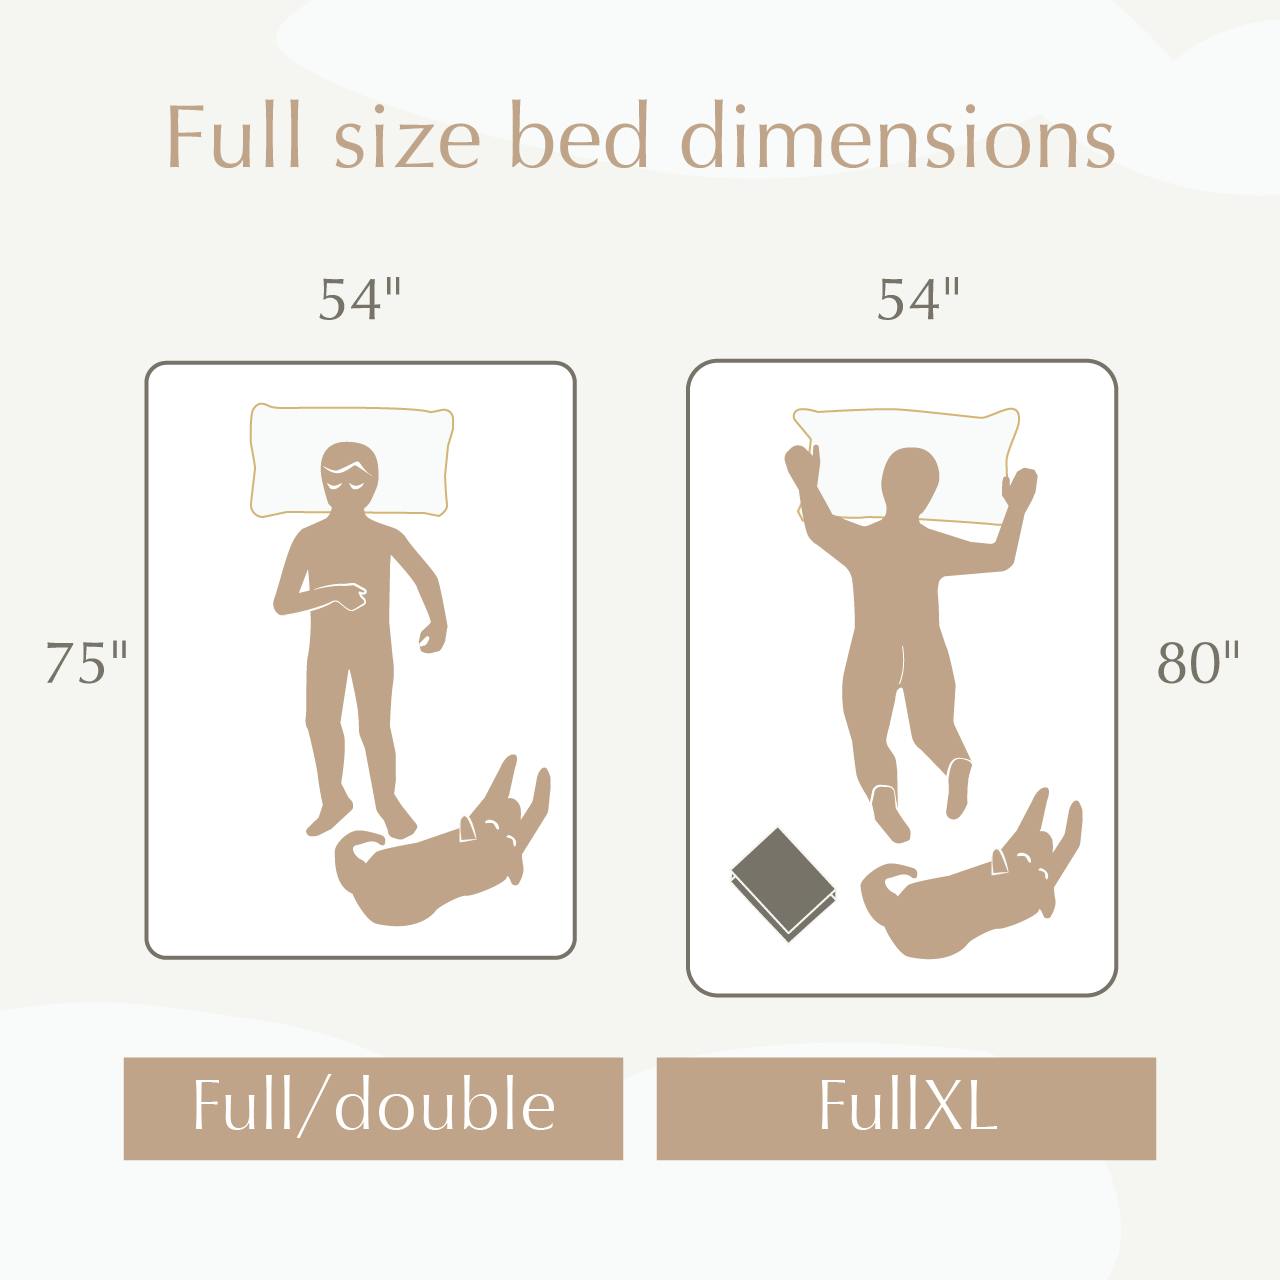 dimensions of full size bed  What Are the Dimensions of Full